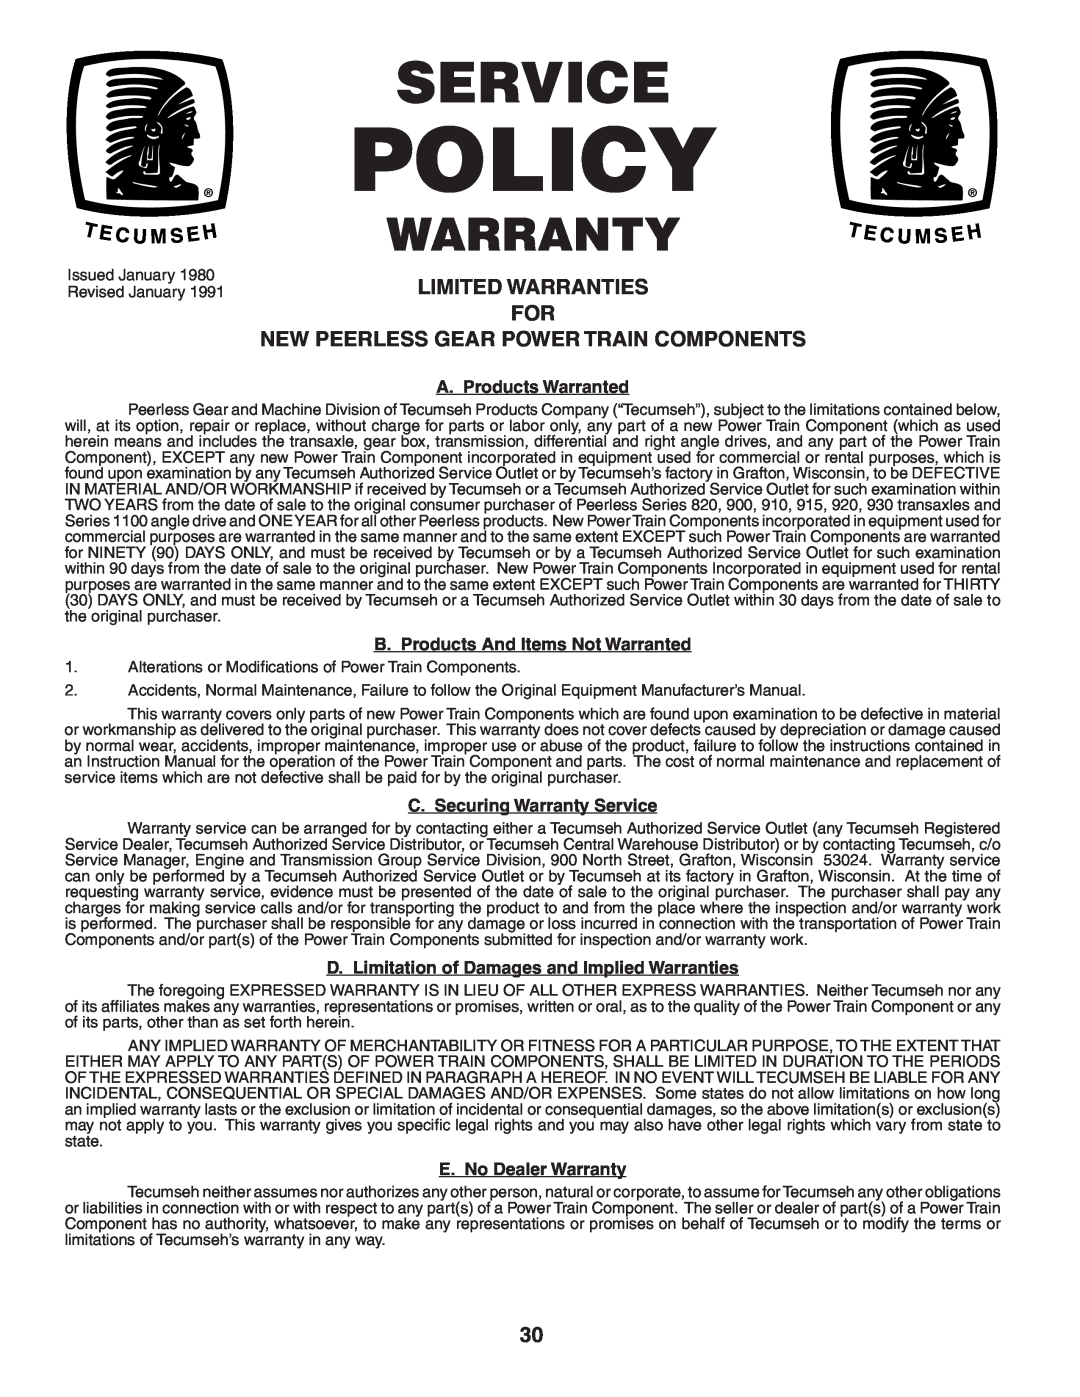 Poulan PKGTH2554 manual Limited Warranties For New Peerless Gear Power Train Components, Policy, Service, Warranty 